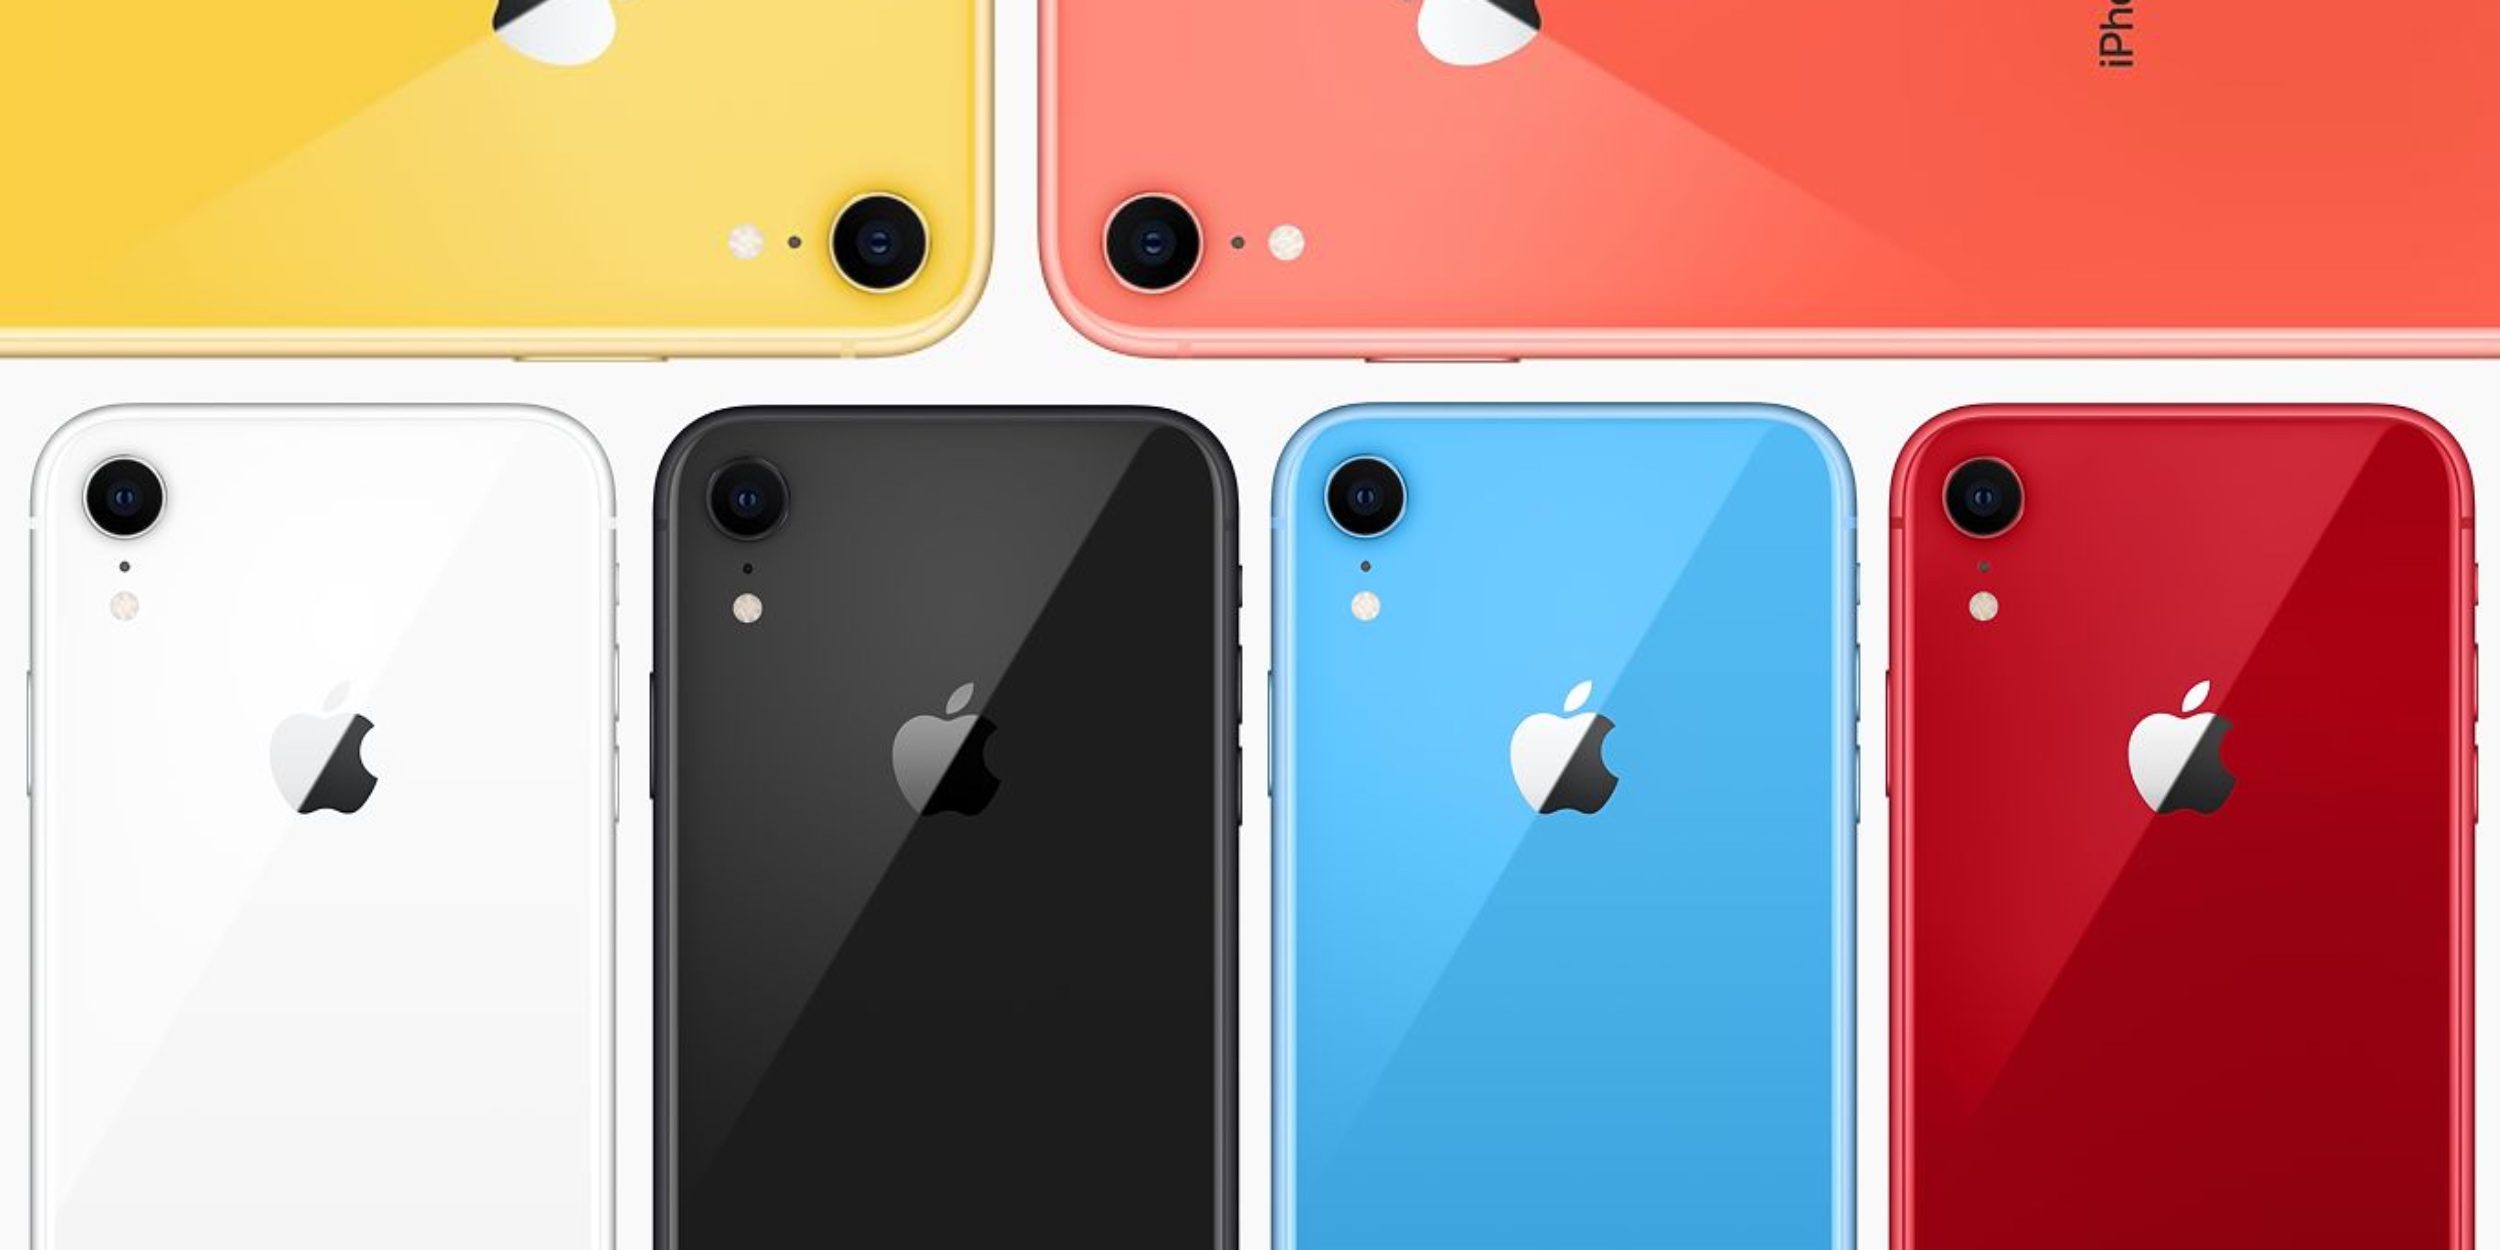 As Rumored, iPhone XR Price Drops by ~$100 at Japanese Carrier Over Two Year Contract